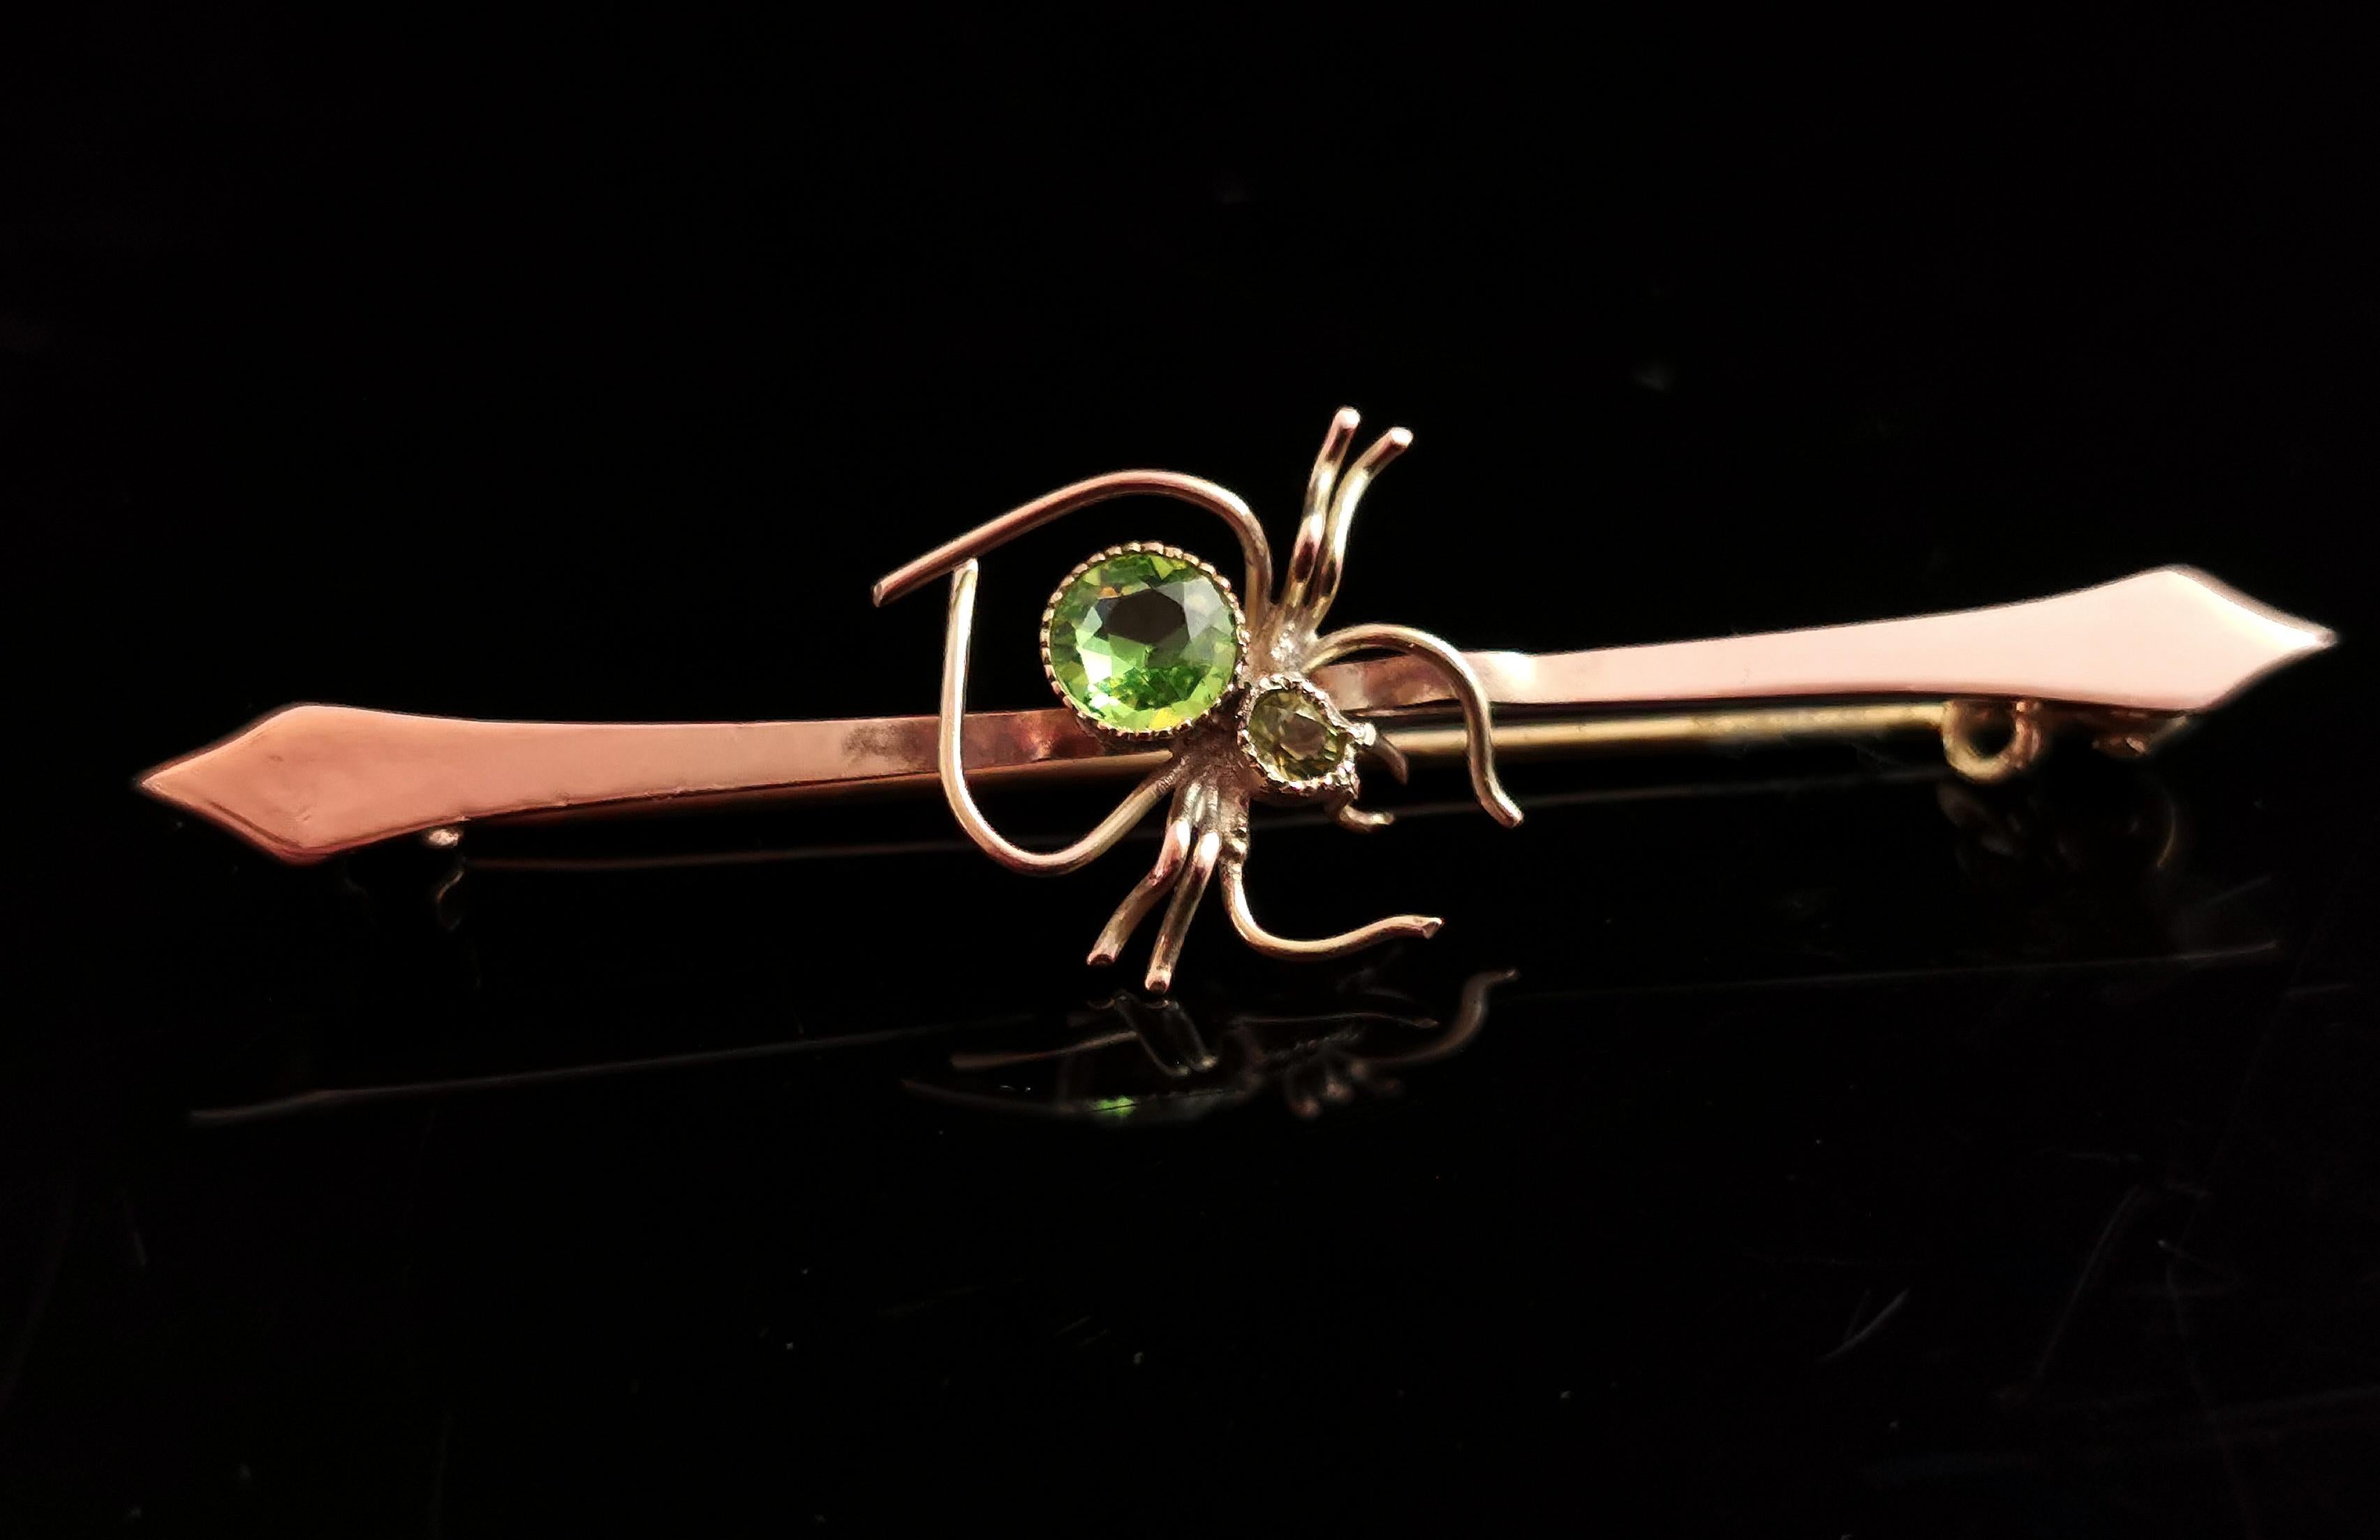 A fantastic antique, Edwardian 9kt gold spider brooch.

The body is made up of a vibrant green round faceted paste stone and the head is a light green peridot stone.

All set in 9kt yellow gold and mounted onto a 9kt gold bar brooch the bar has kite